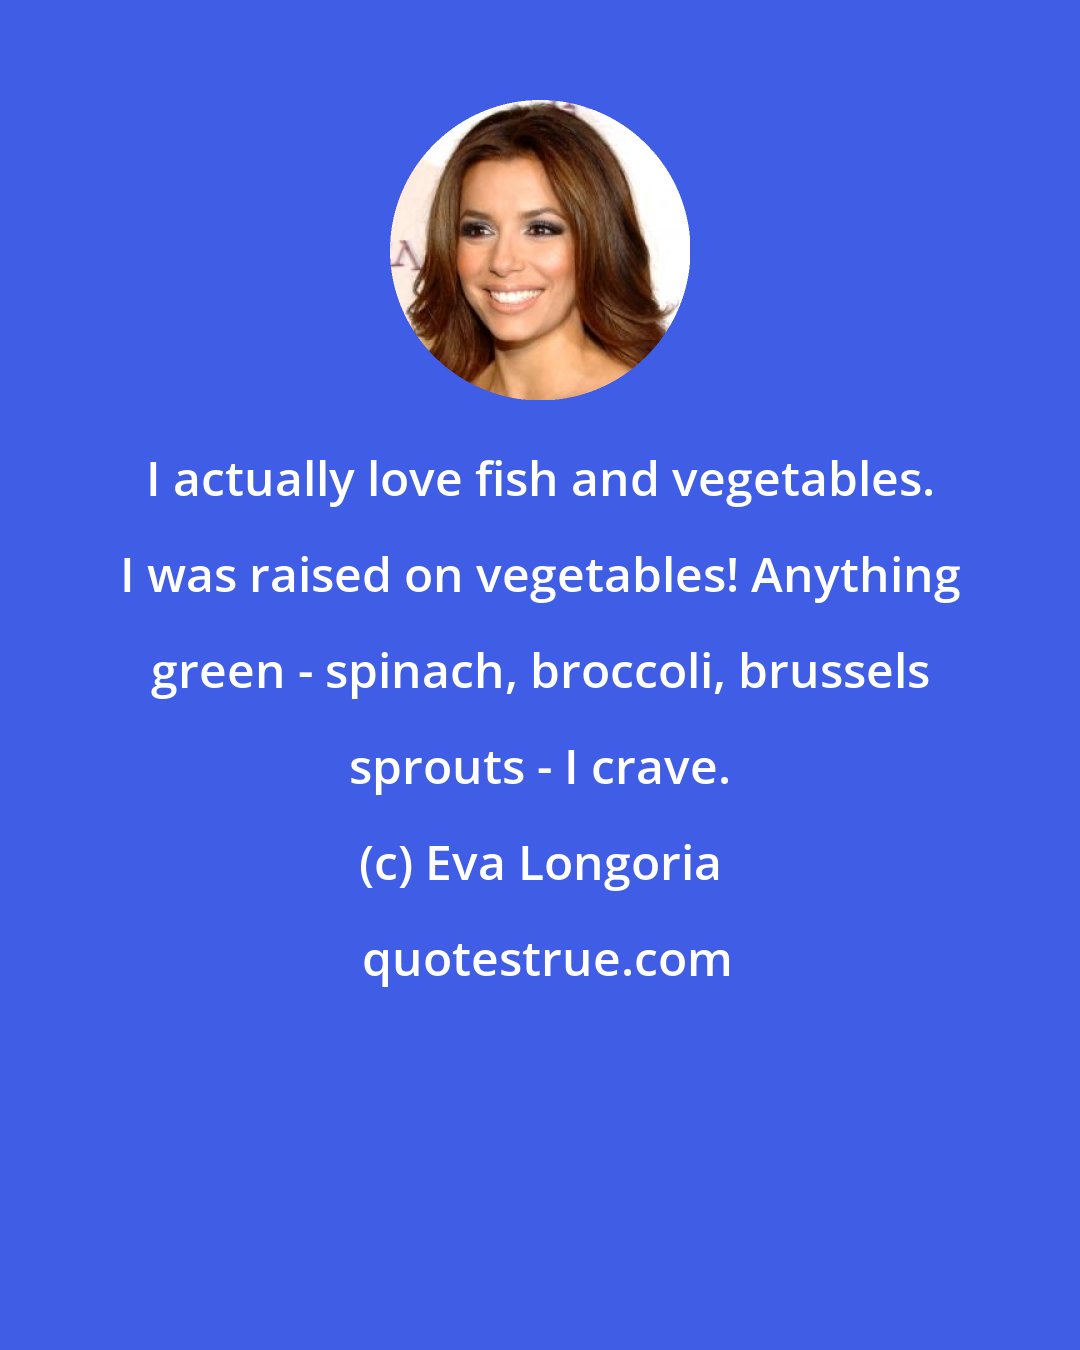 Eva Longoria: I actually love fish and vegetables. I was raised on vegetables! Anything green - spinach, broccoli, brussels sprouts - I crave.